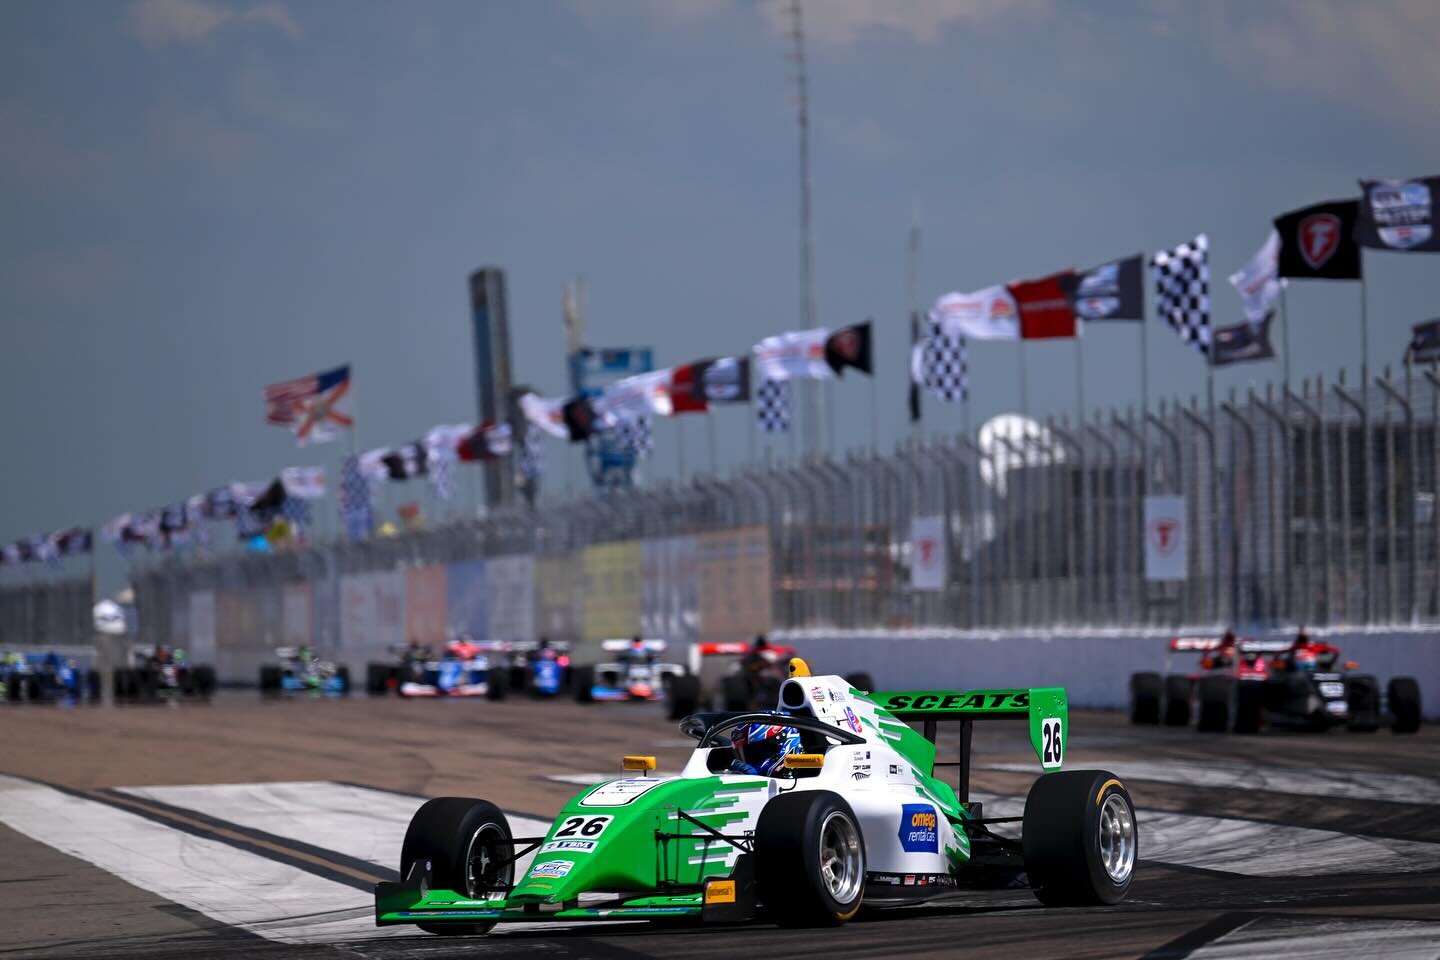 P3 on debut here in the USA! 🇺🇸

A bit of a crazy race with three race restarts so I got to experience a true fashion @usfprochampionships race.

The car @tjspeedmotorsports provided me was strong, so a big thank you to them for making this result 